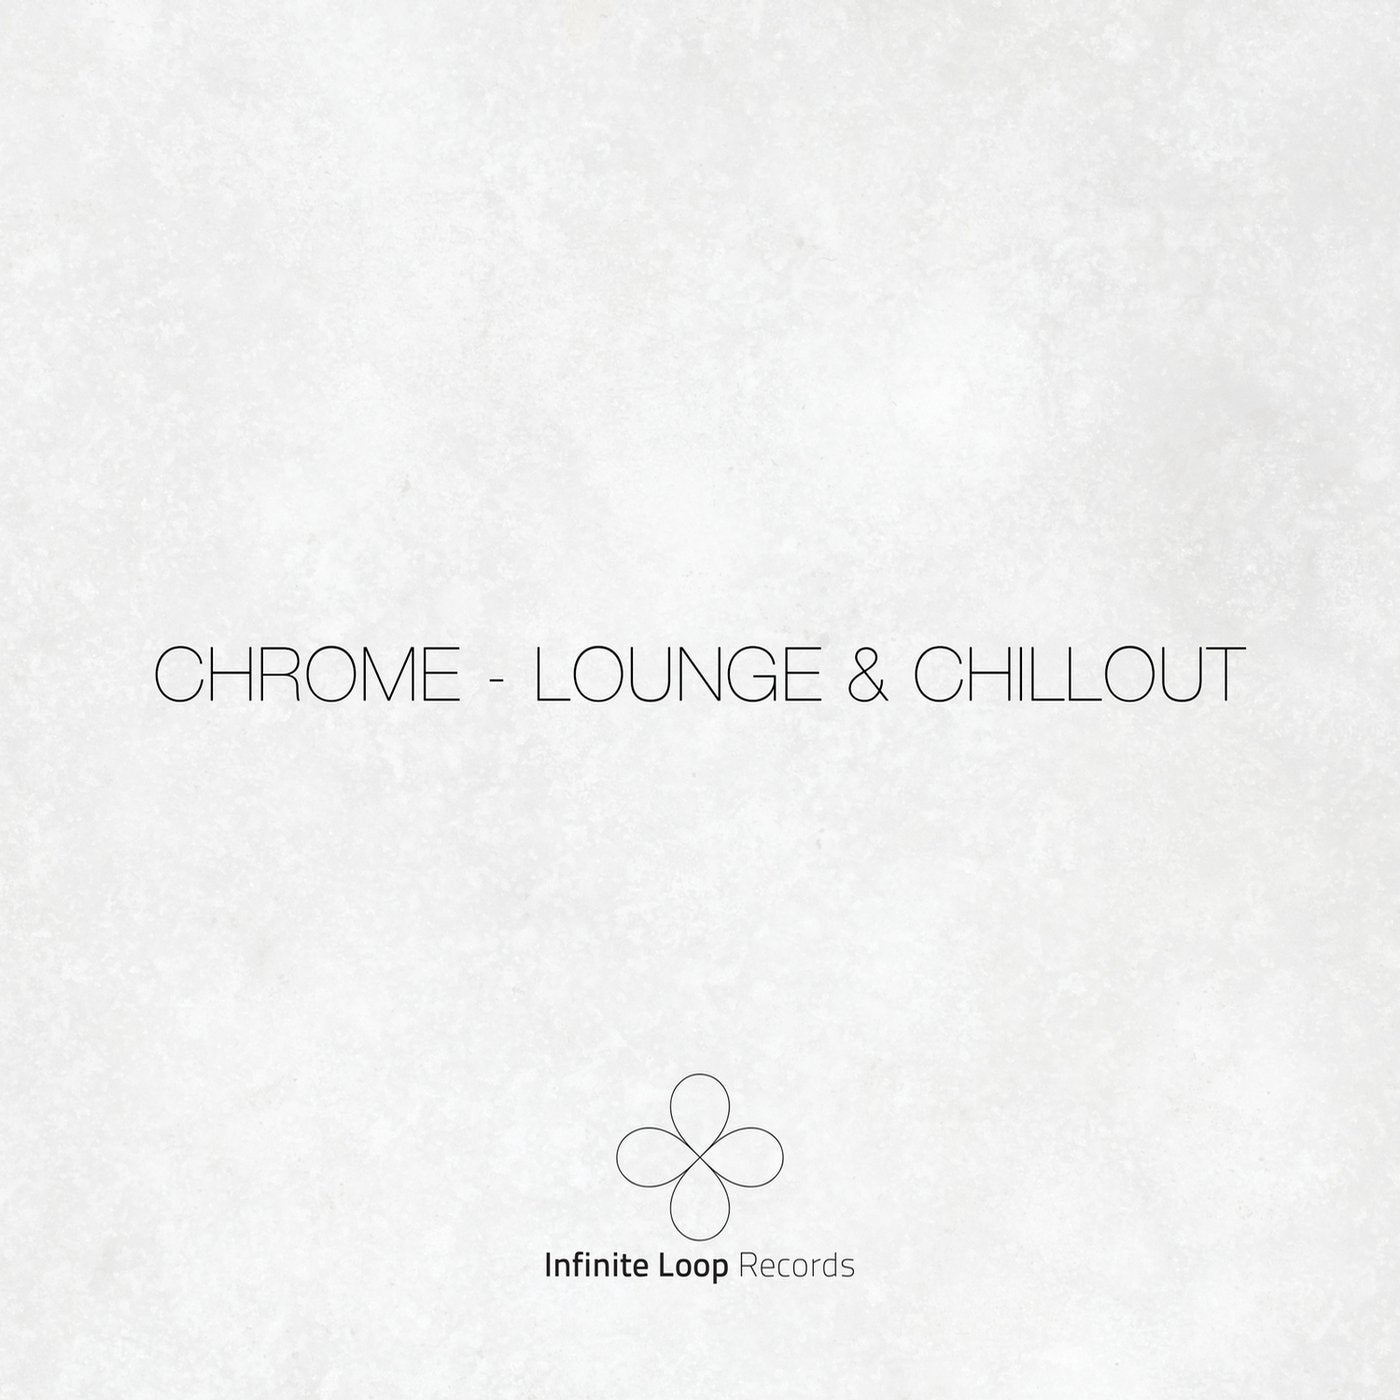 Chrome - Lounge & Chillout